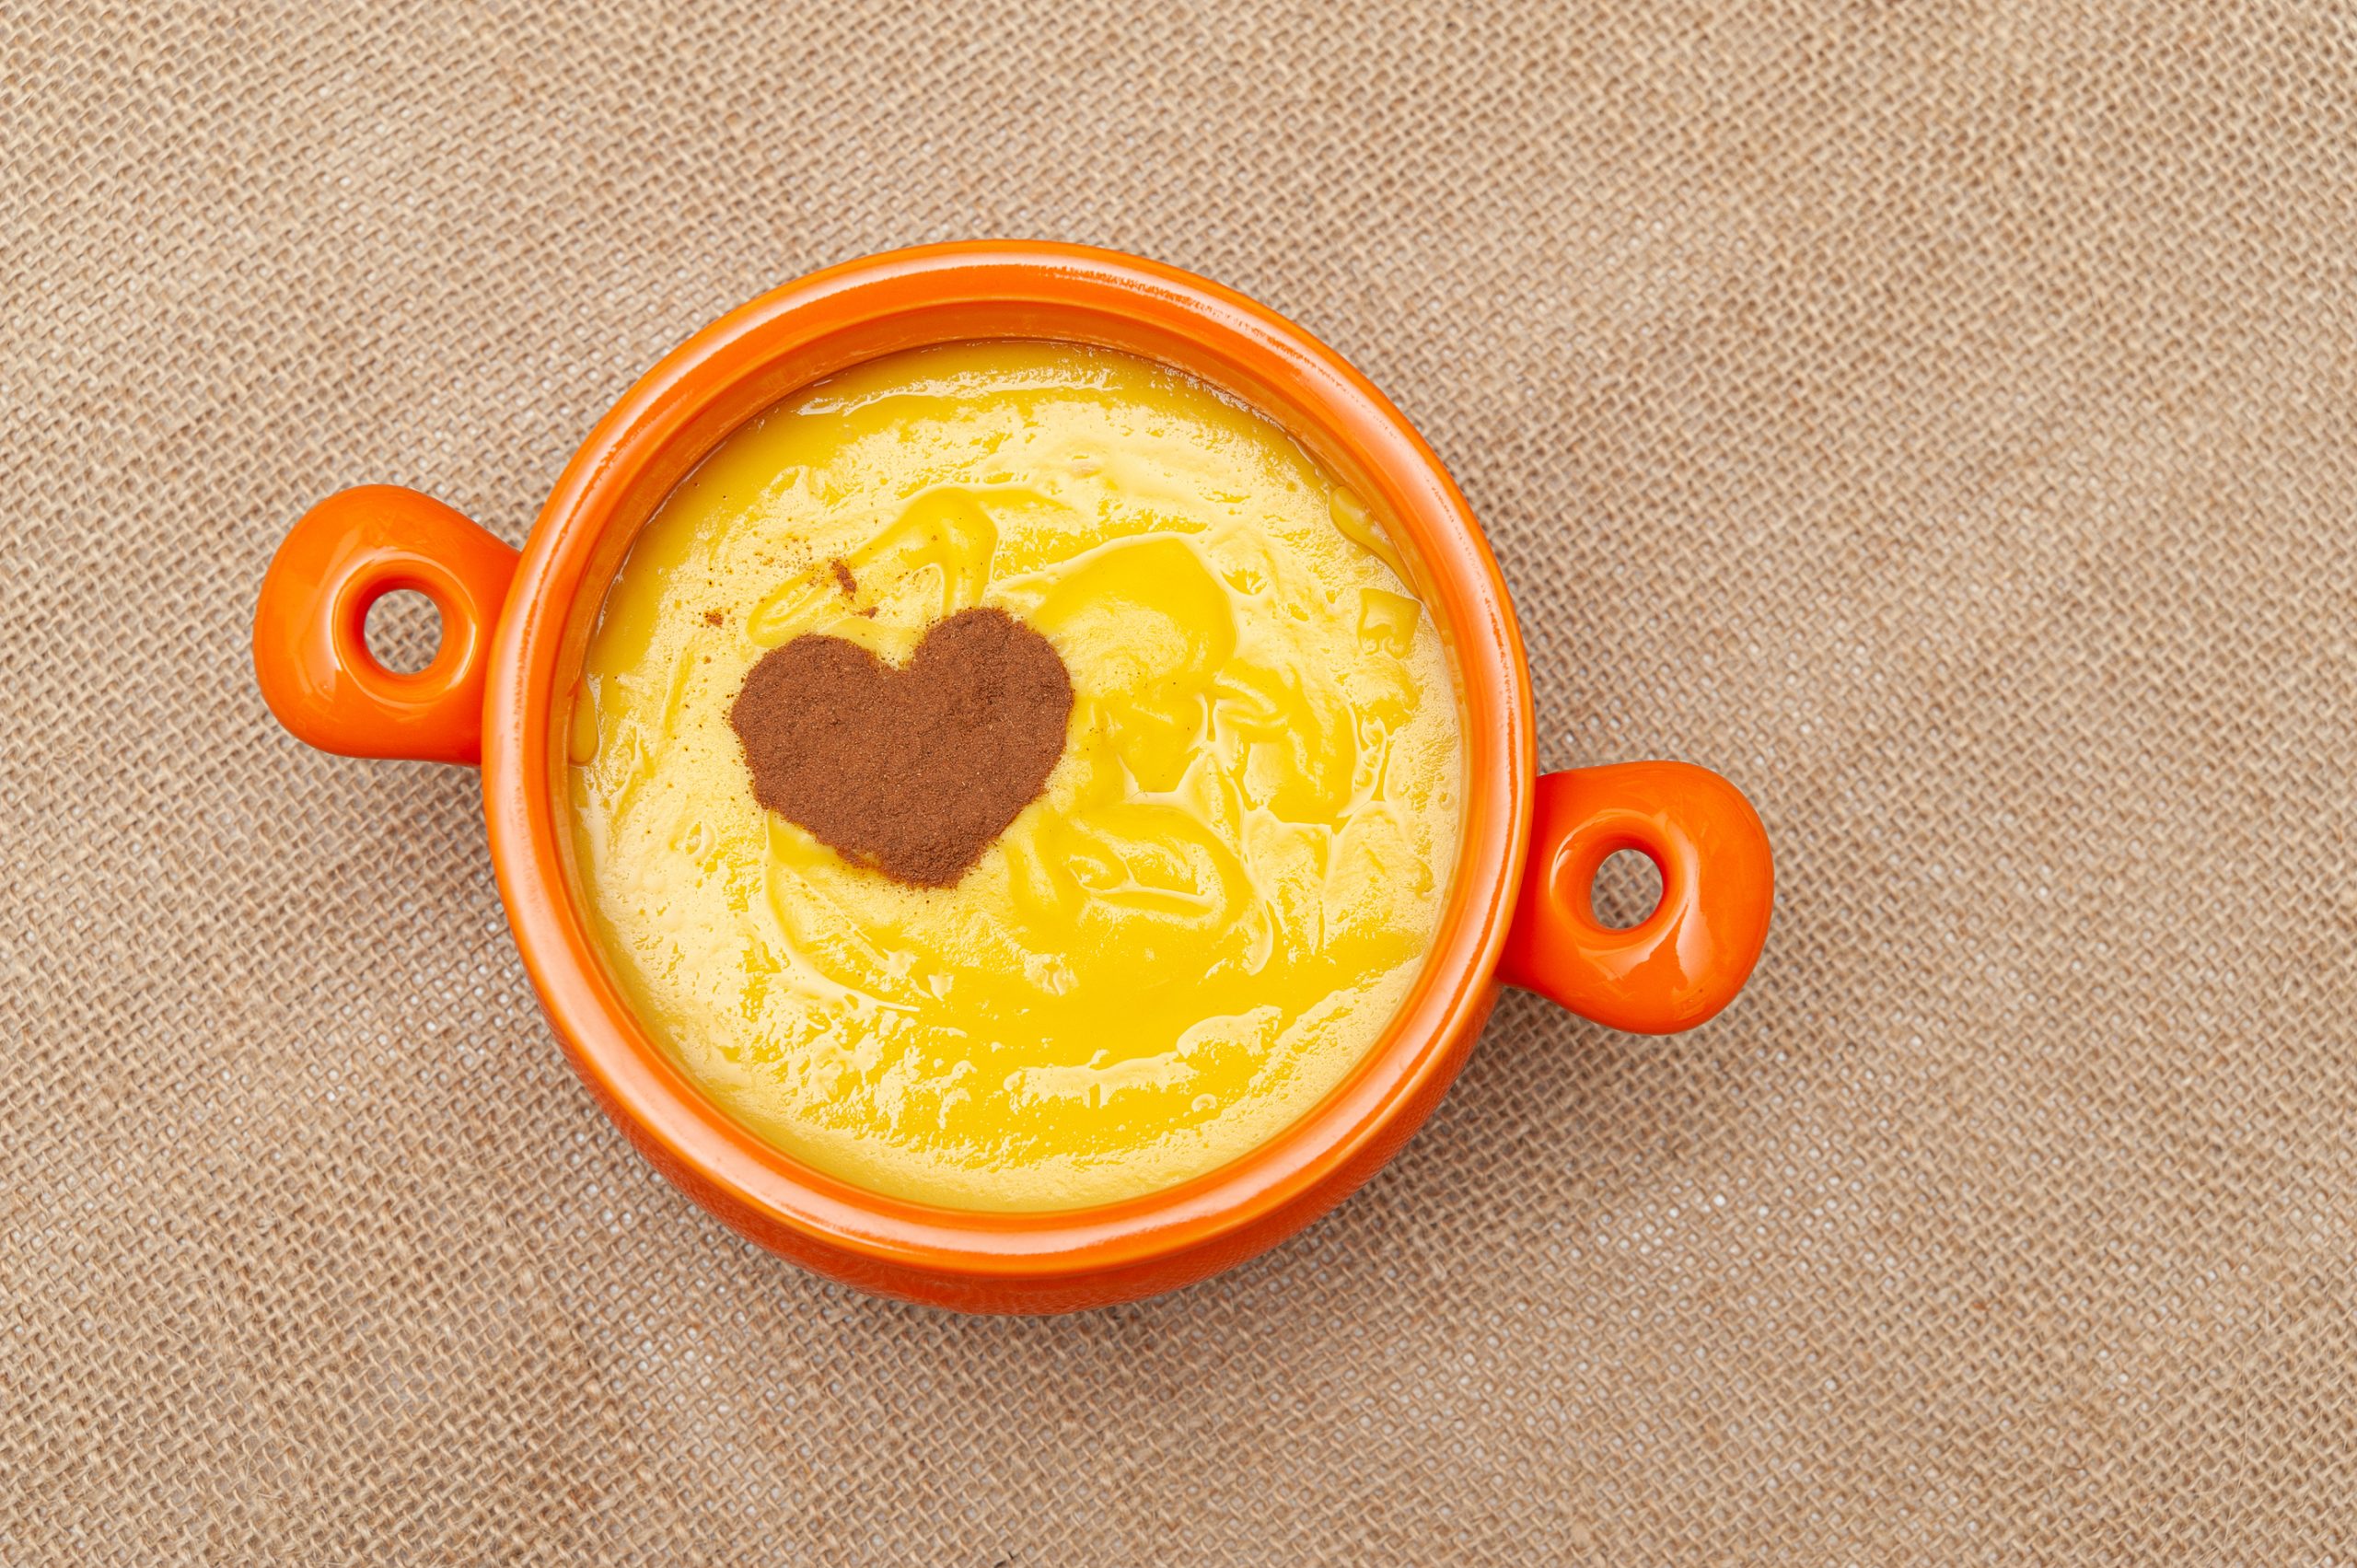 [RECIPE] Comforting corn pudding in just 4 easy steps